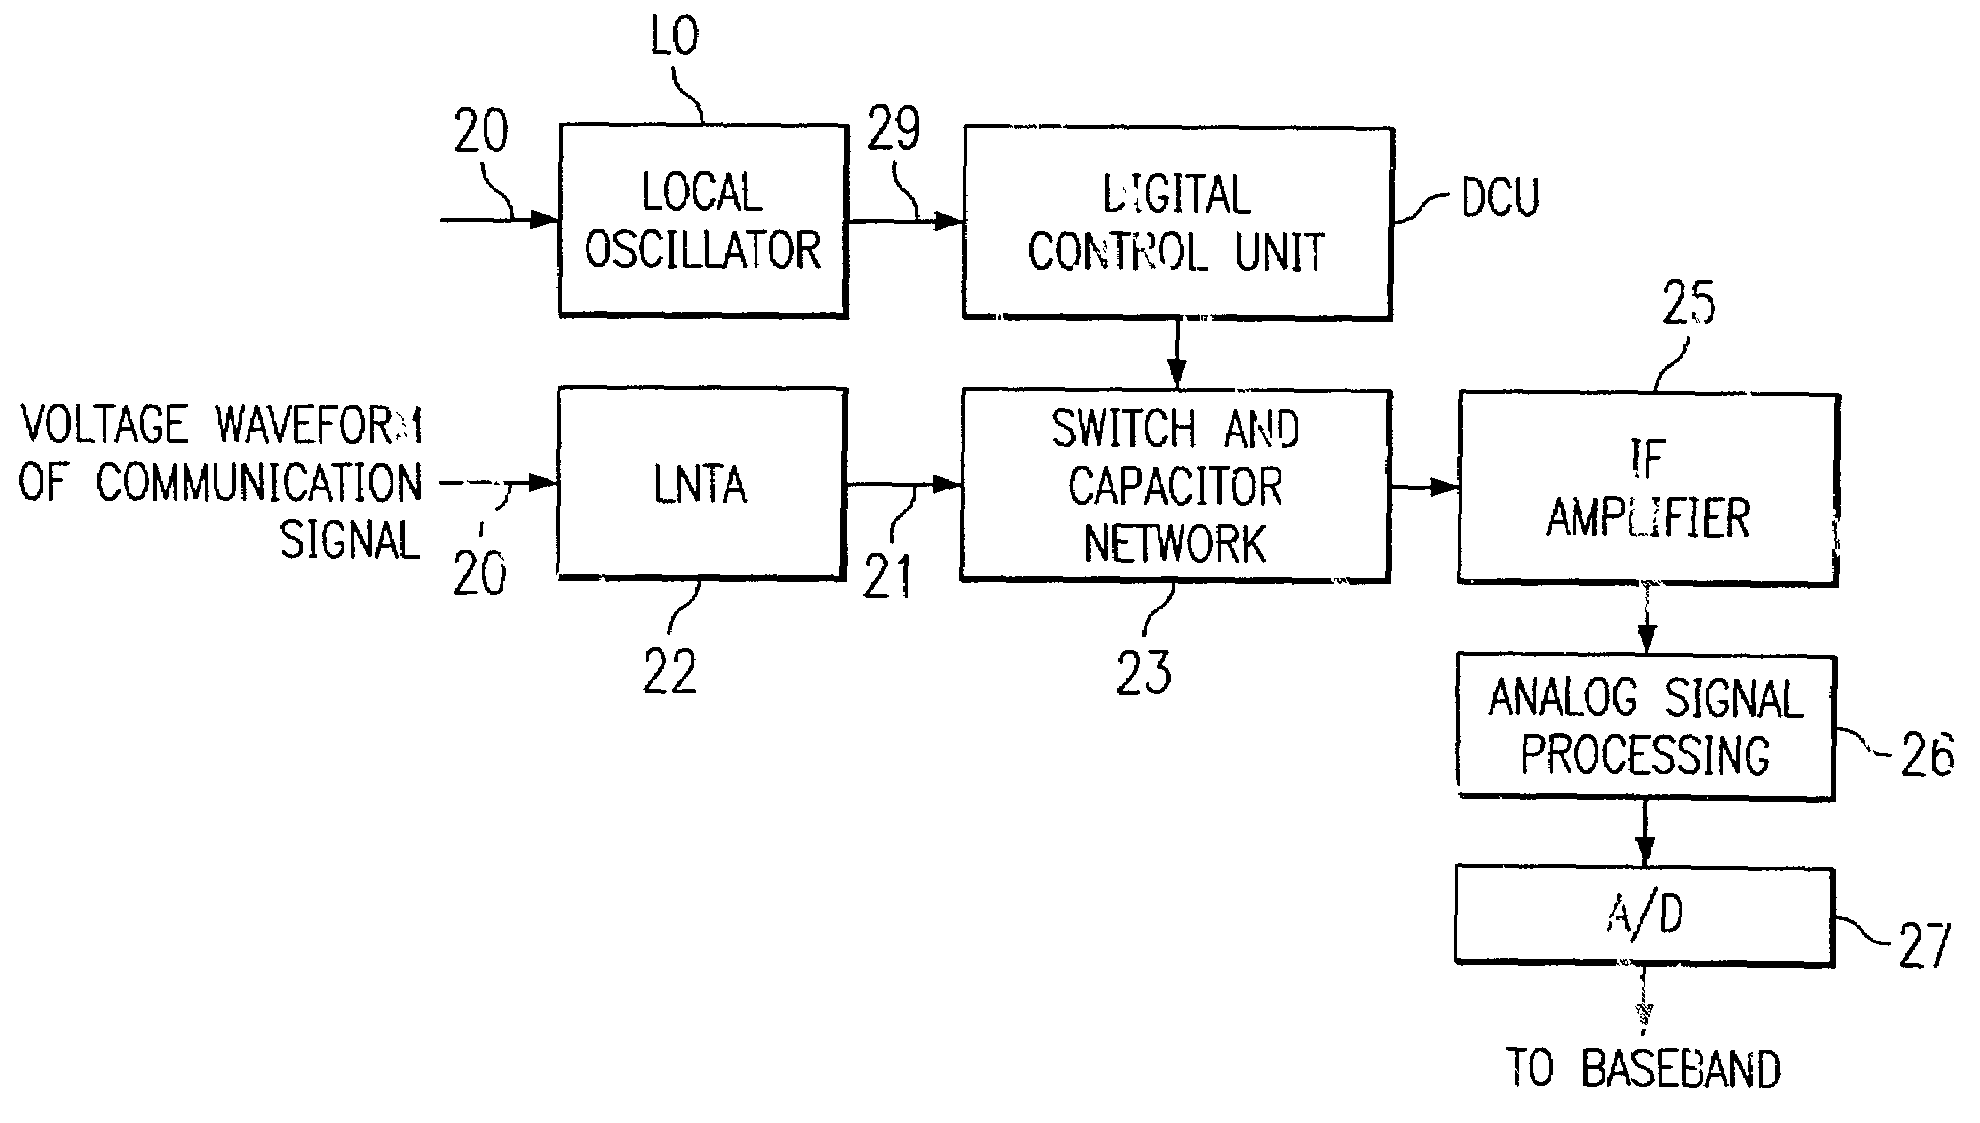 Digitally controlled analog RF filtering in subsampling communication receiver architecture